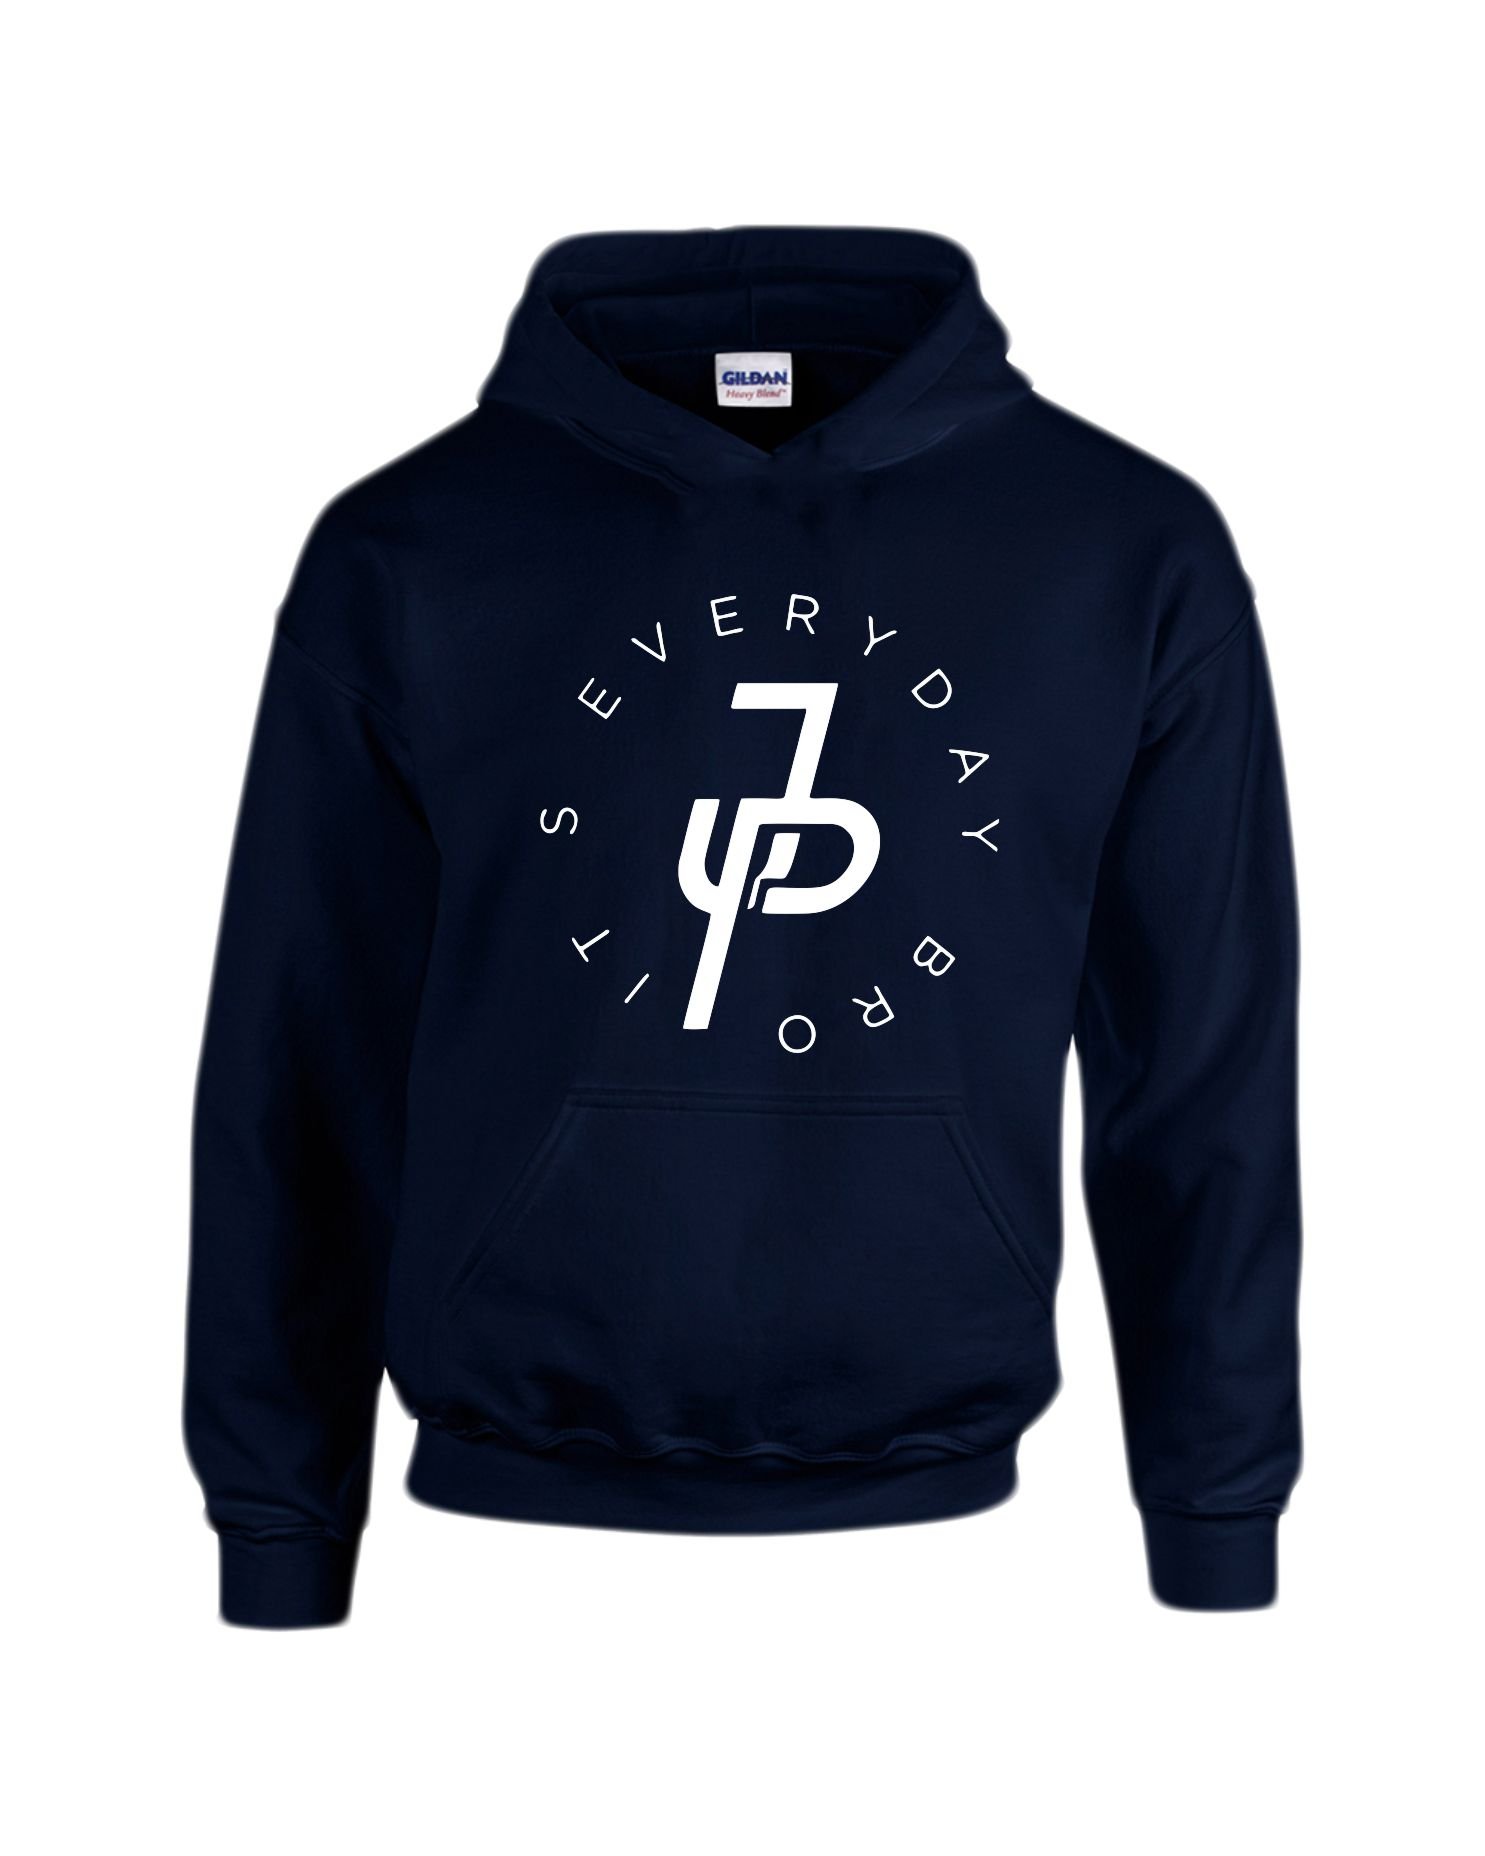 Style with Confidence: Jake Paul Official Merch